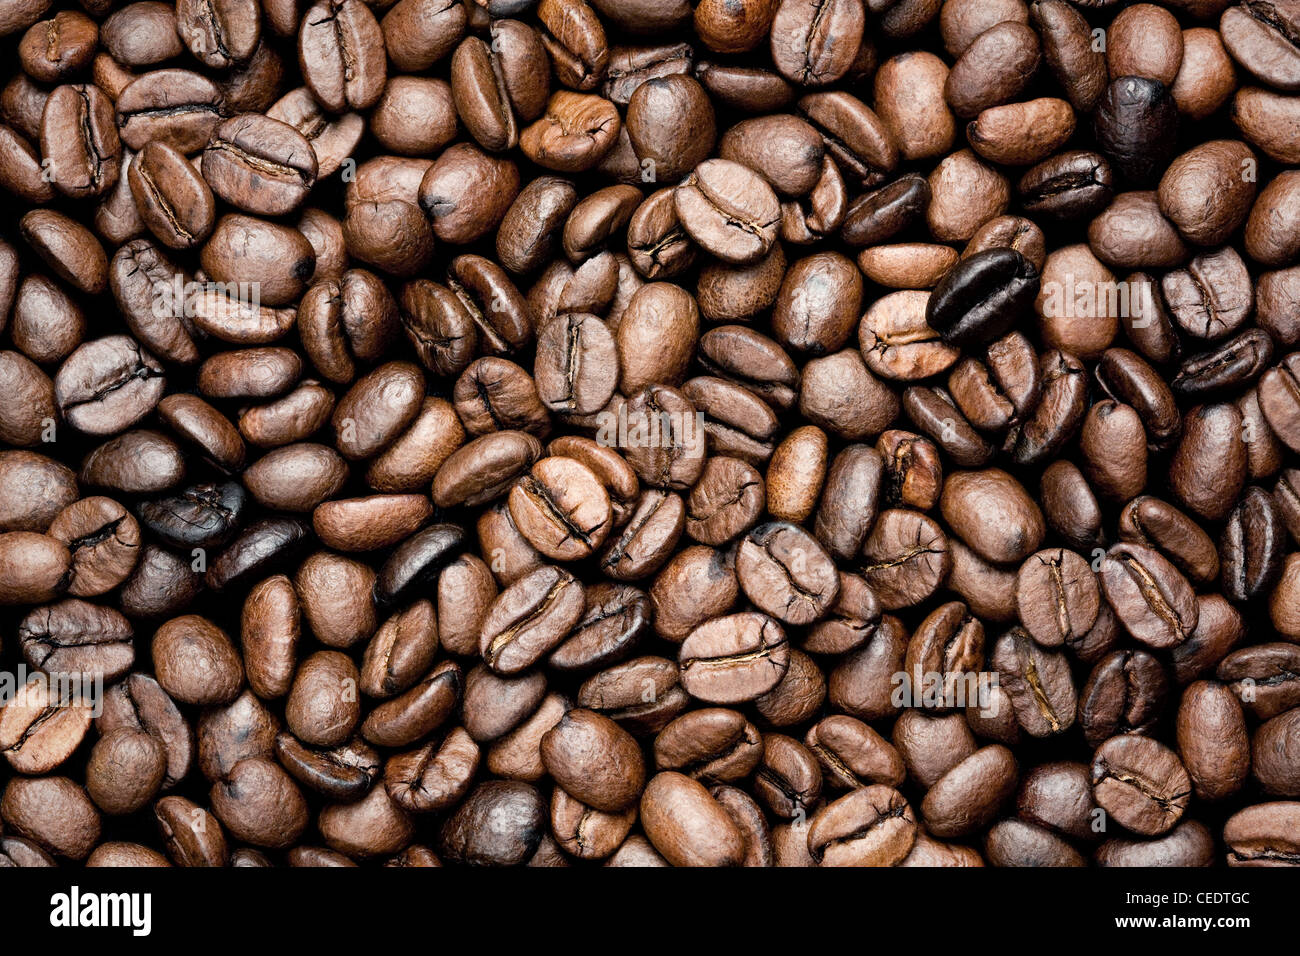 Fresh roasted Coffee beans' contexte Banque D'Images